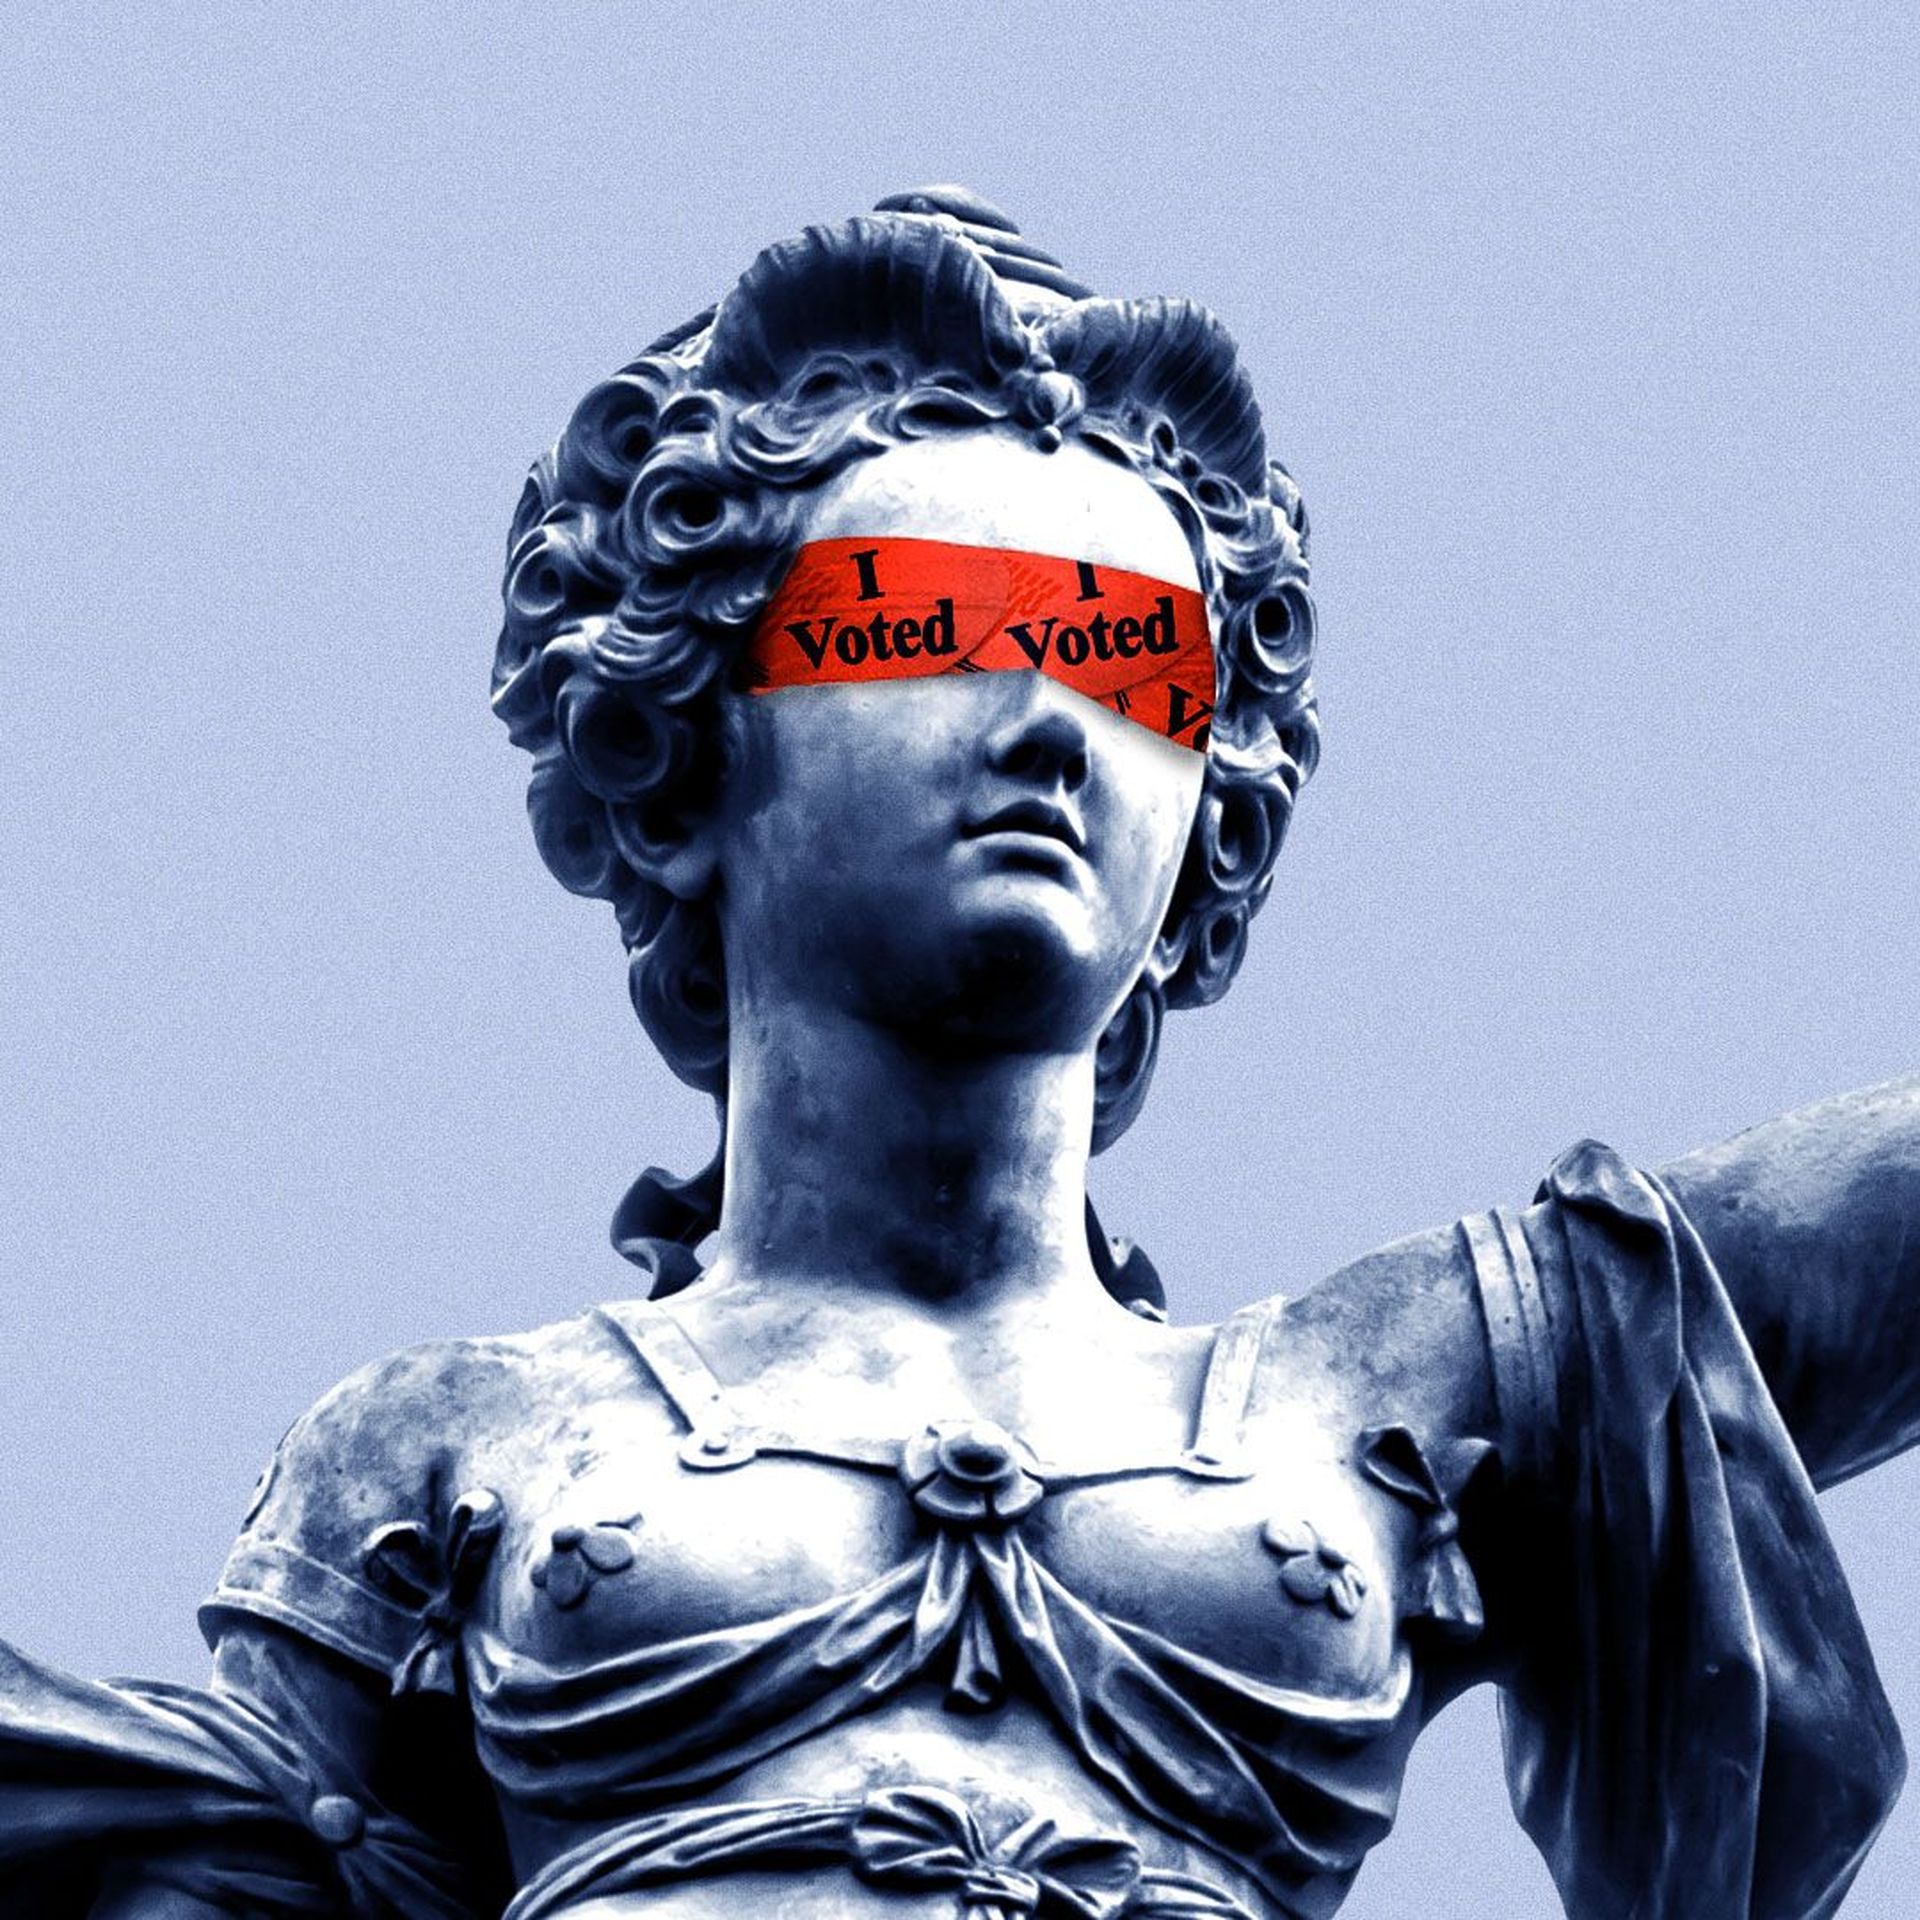 Illustration of lady justice with an “I voted” stickers blindfold over her eyes